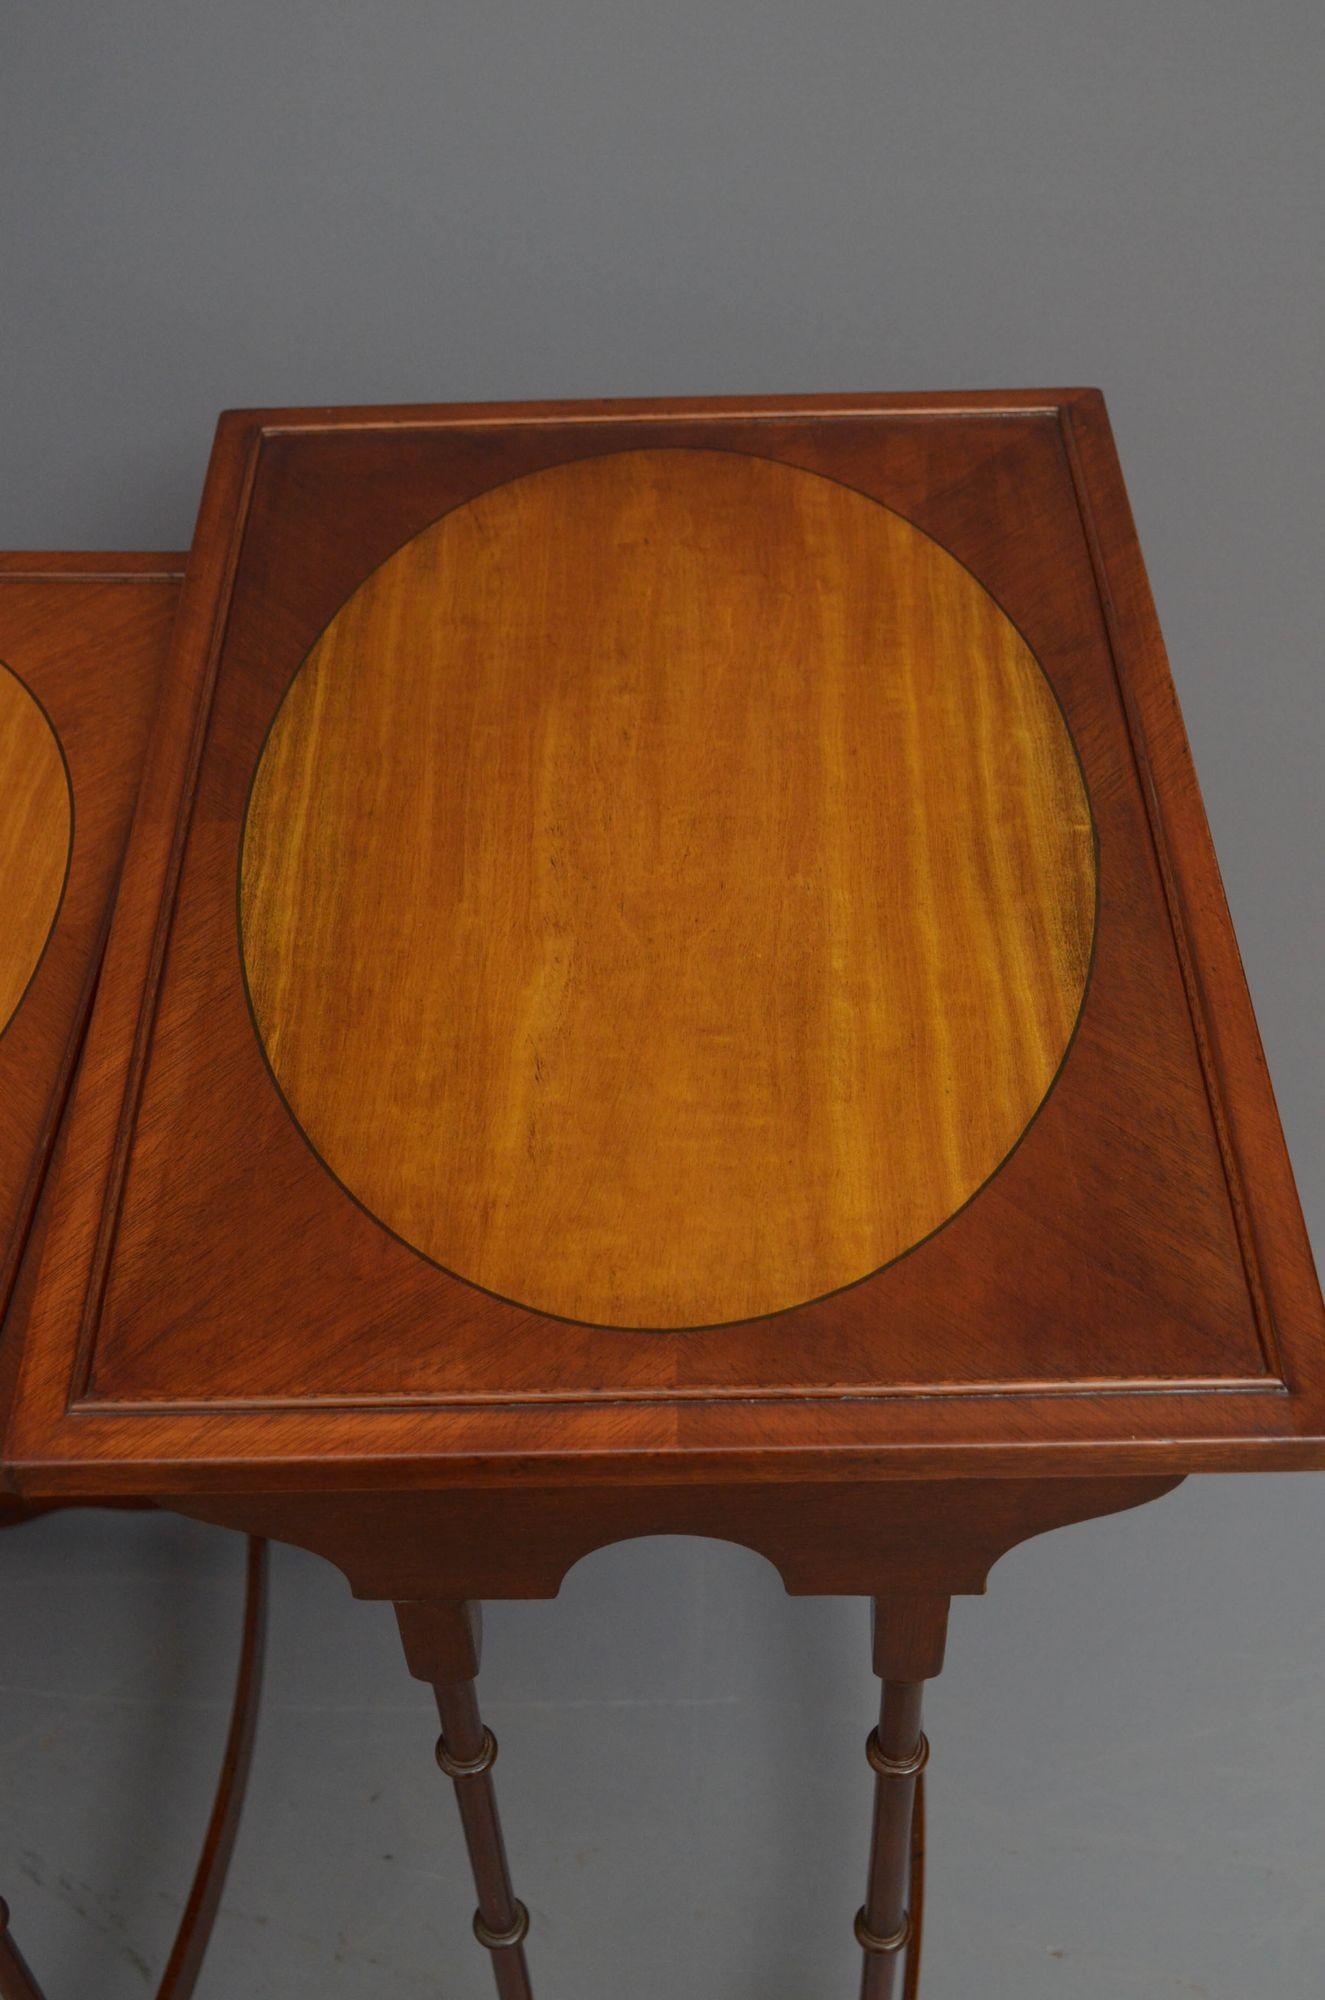 Edwardian Mahogany and Satinwood Nest of Tables For Sale 4